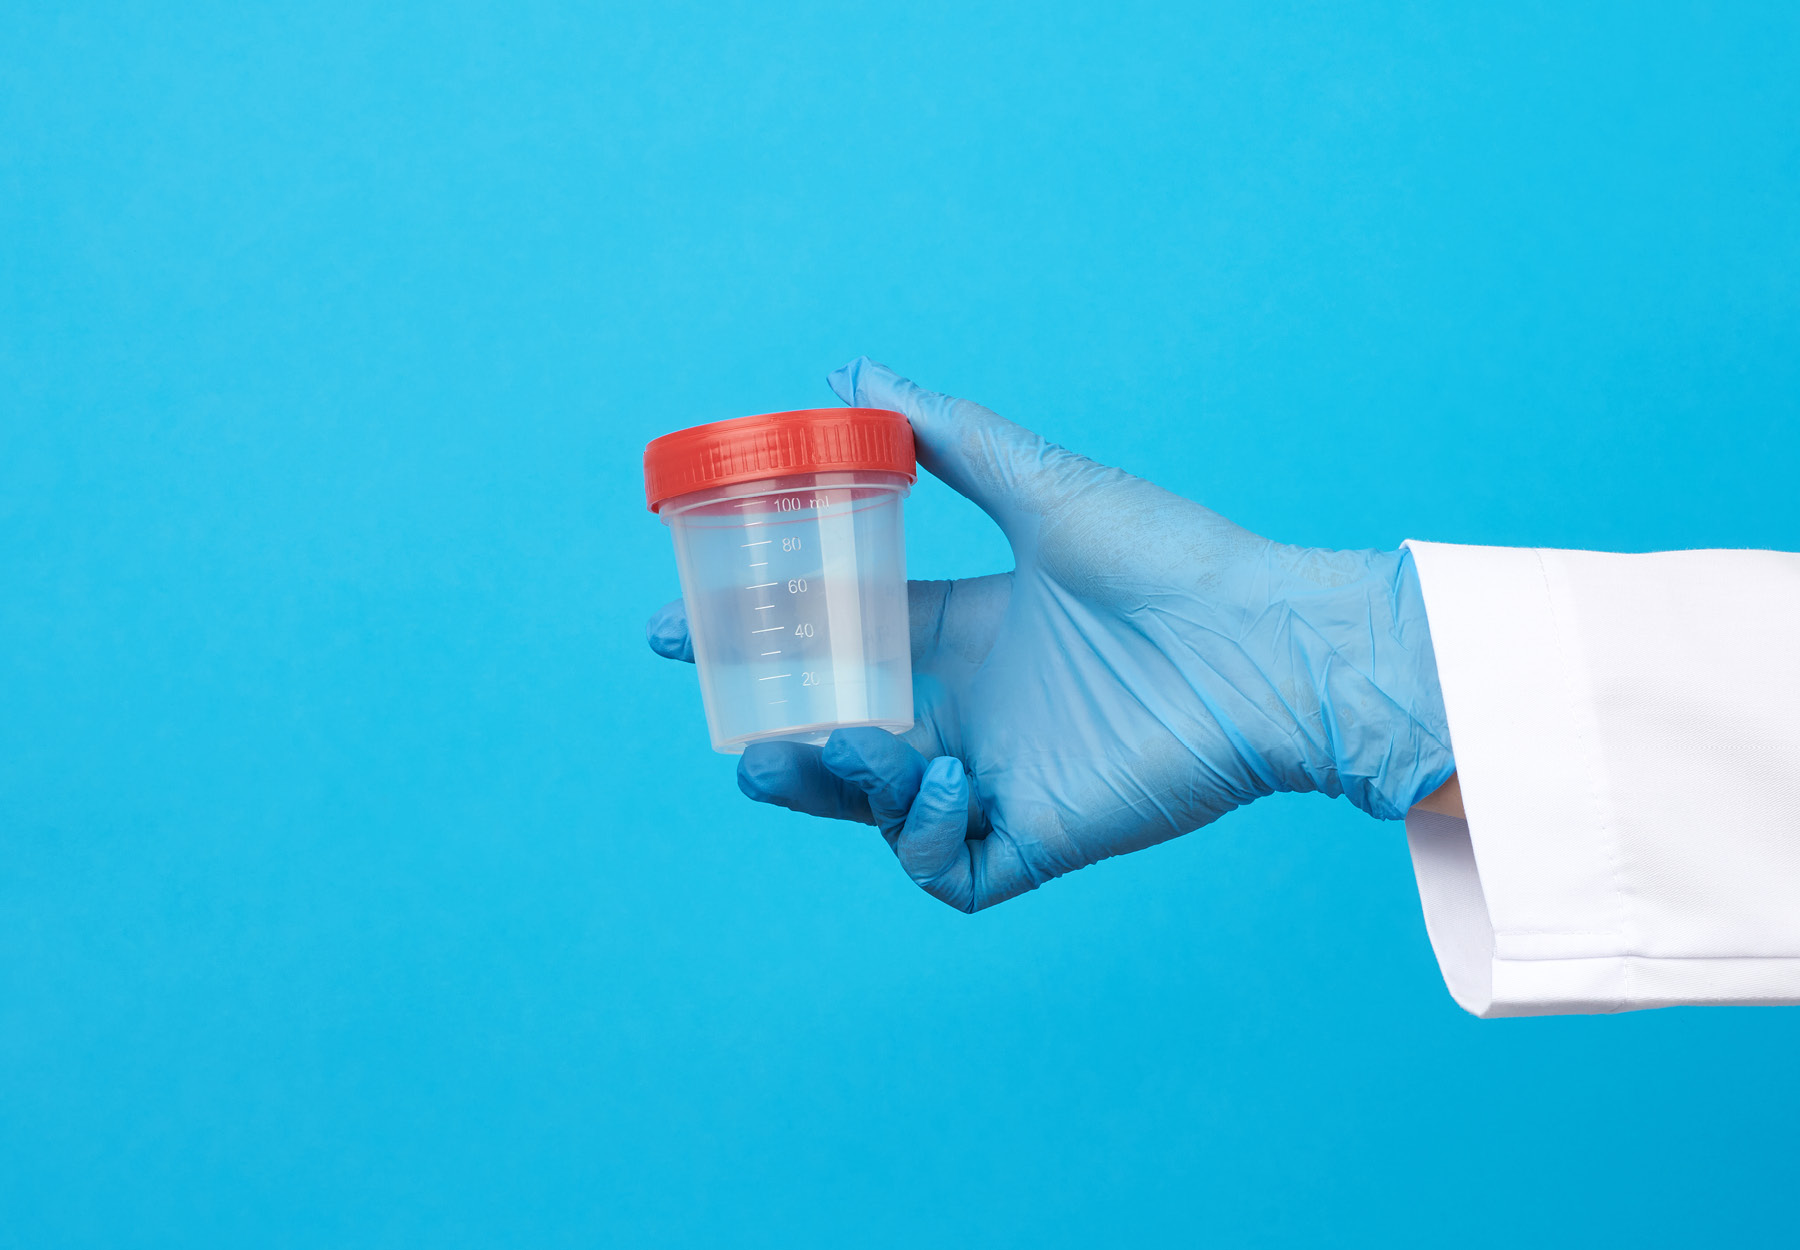 doctor in a white coat holds a empty plastic container for urine specimen, wearing blue sterile medical gloves